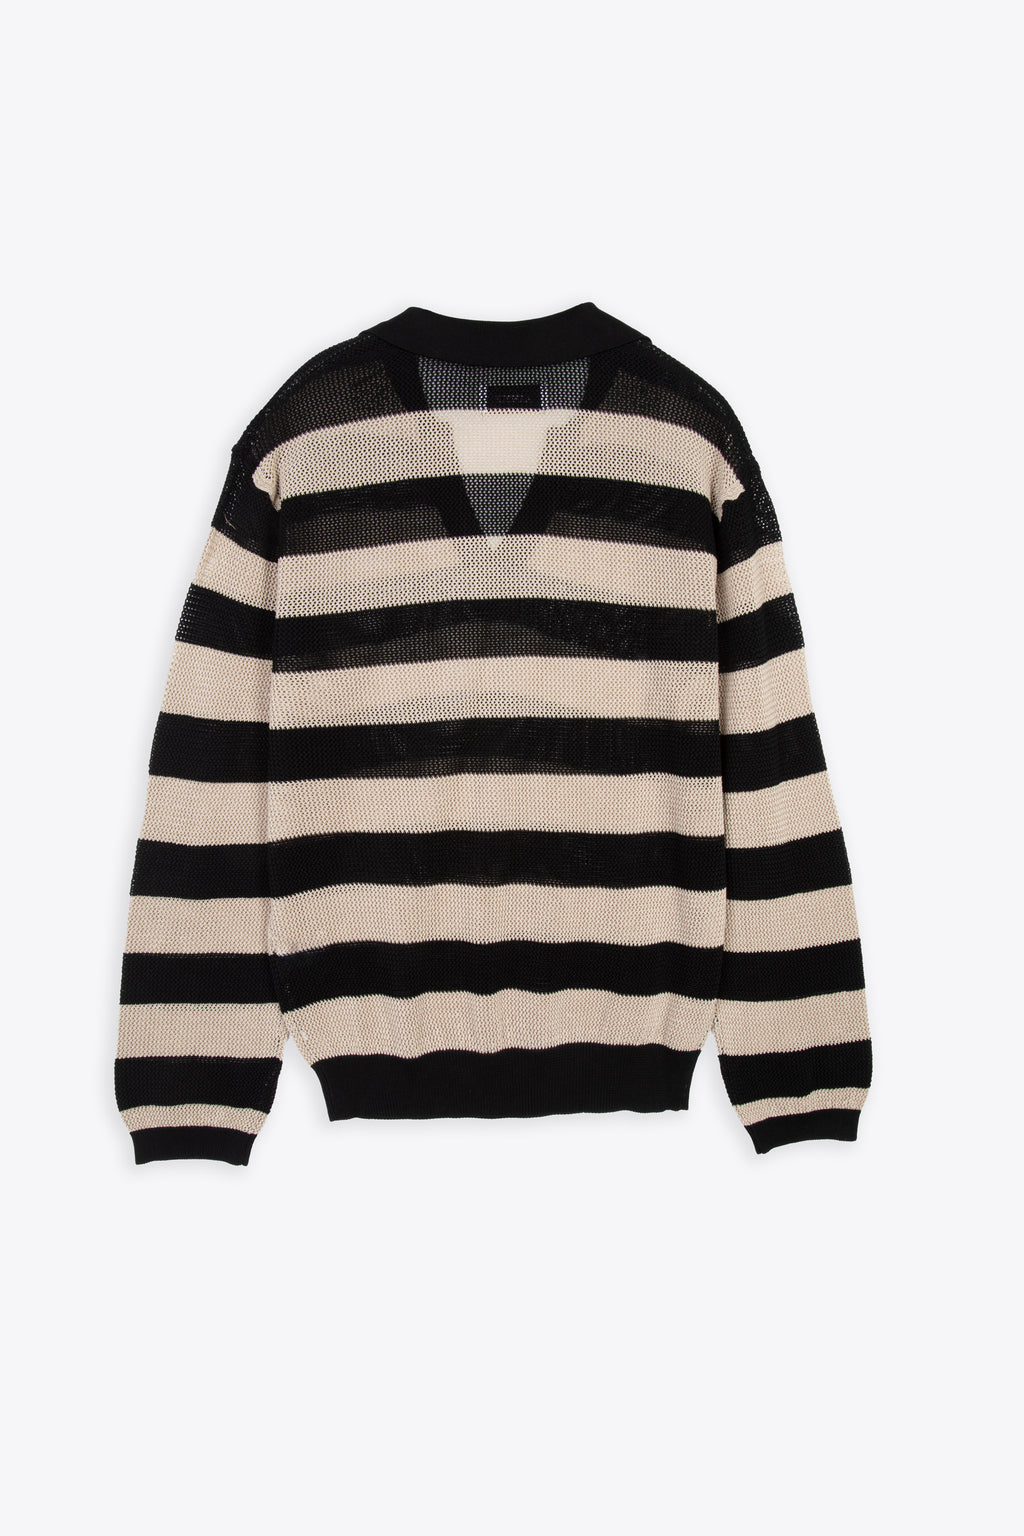 alt-image__Beige-and-black-striped-mesh-knitted-polo-shirt---Mesh-polo-shirt-